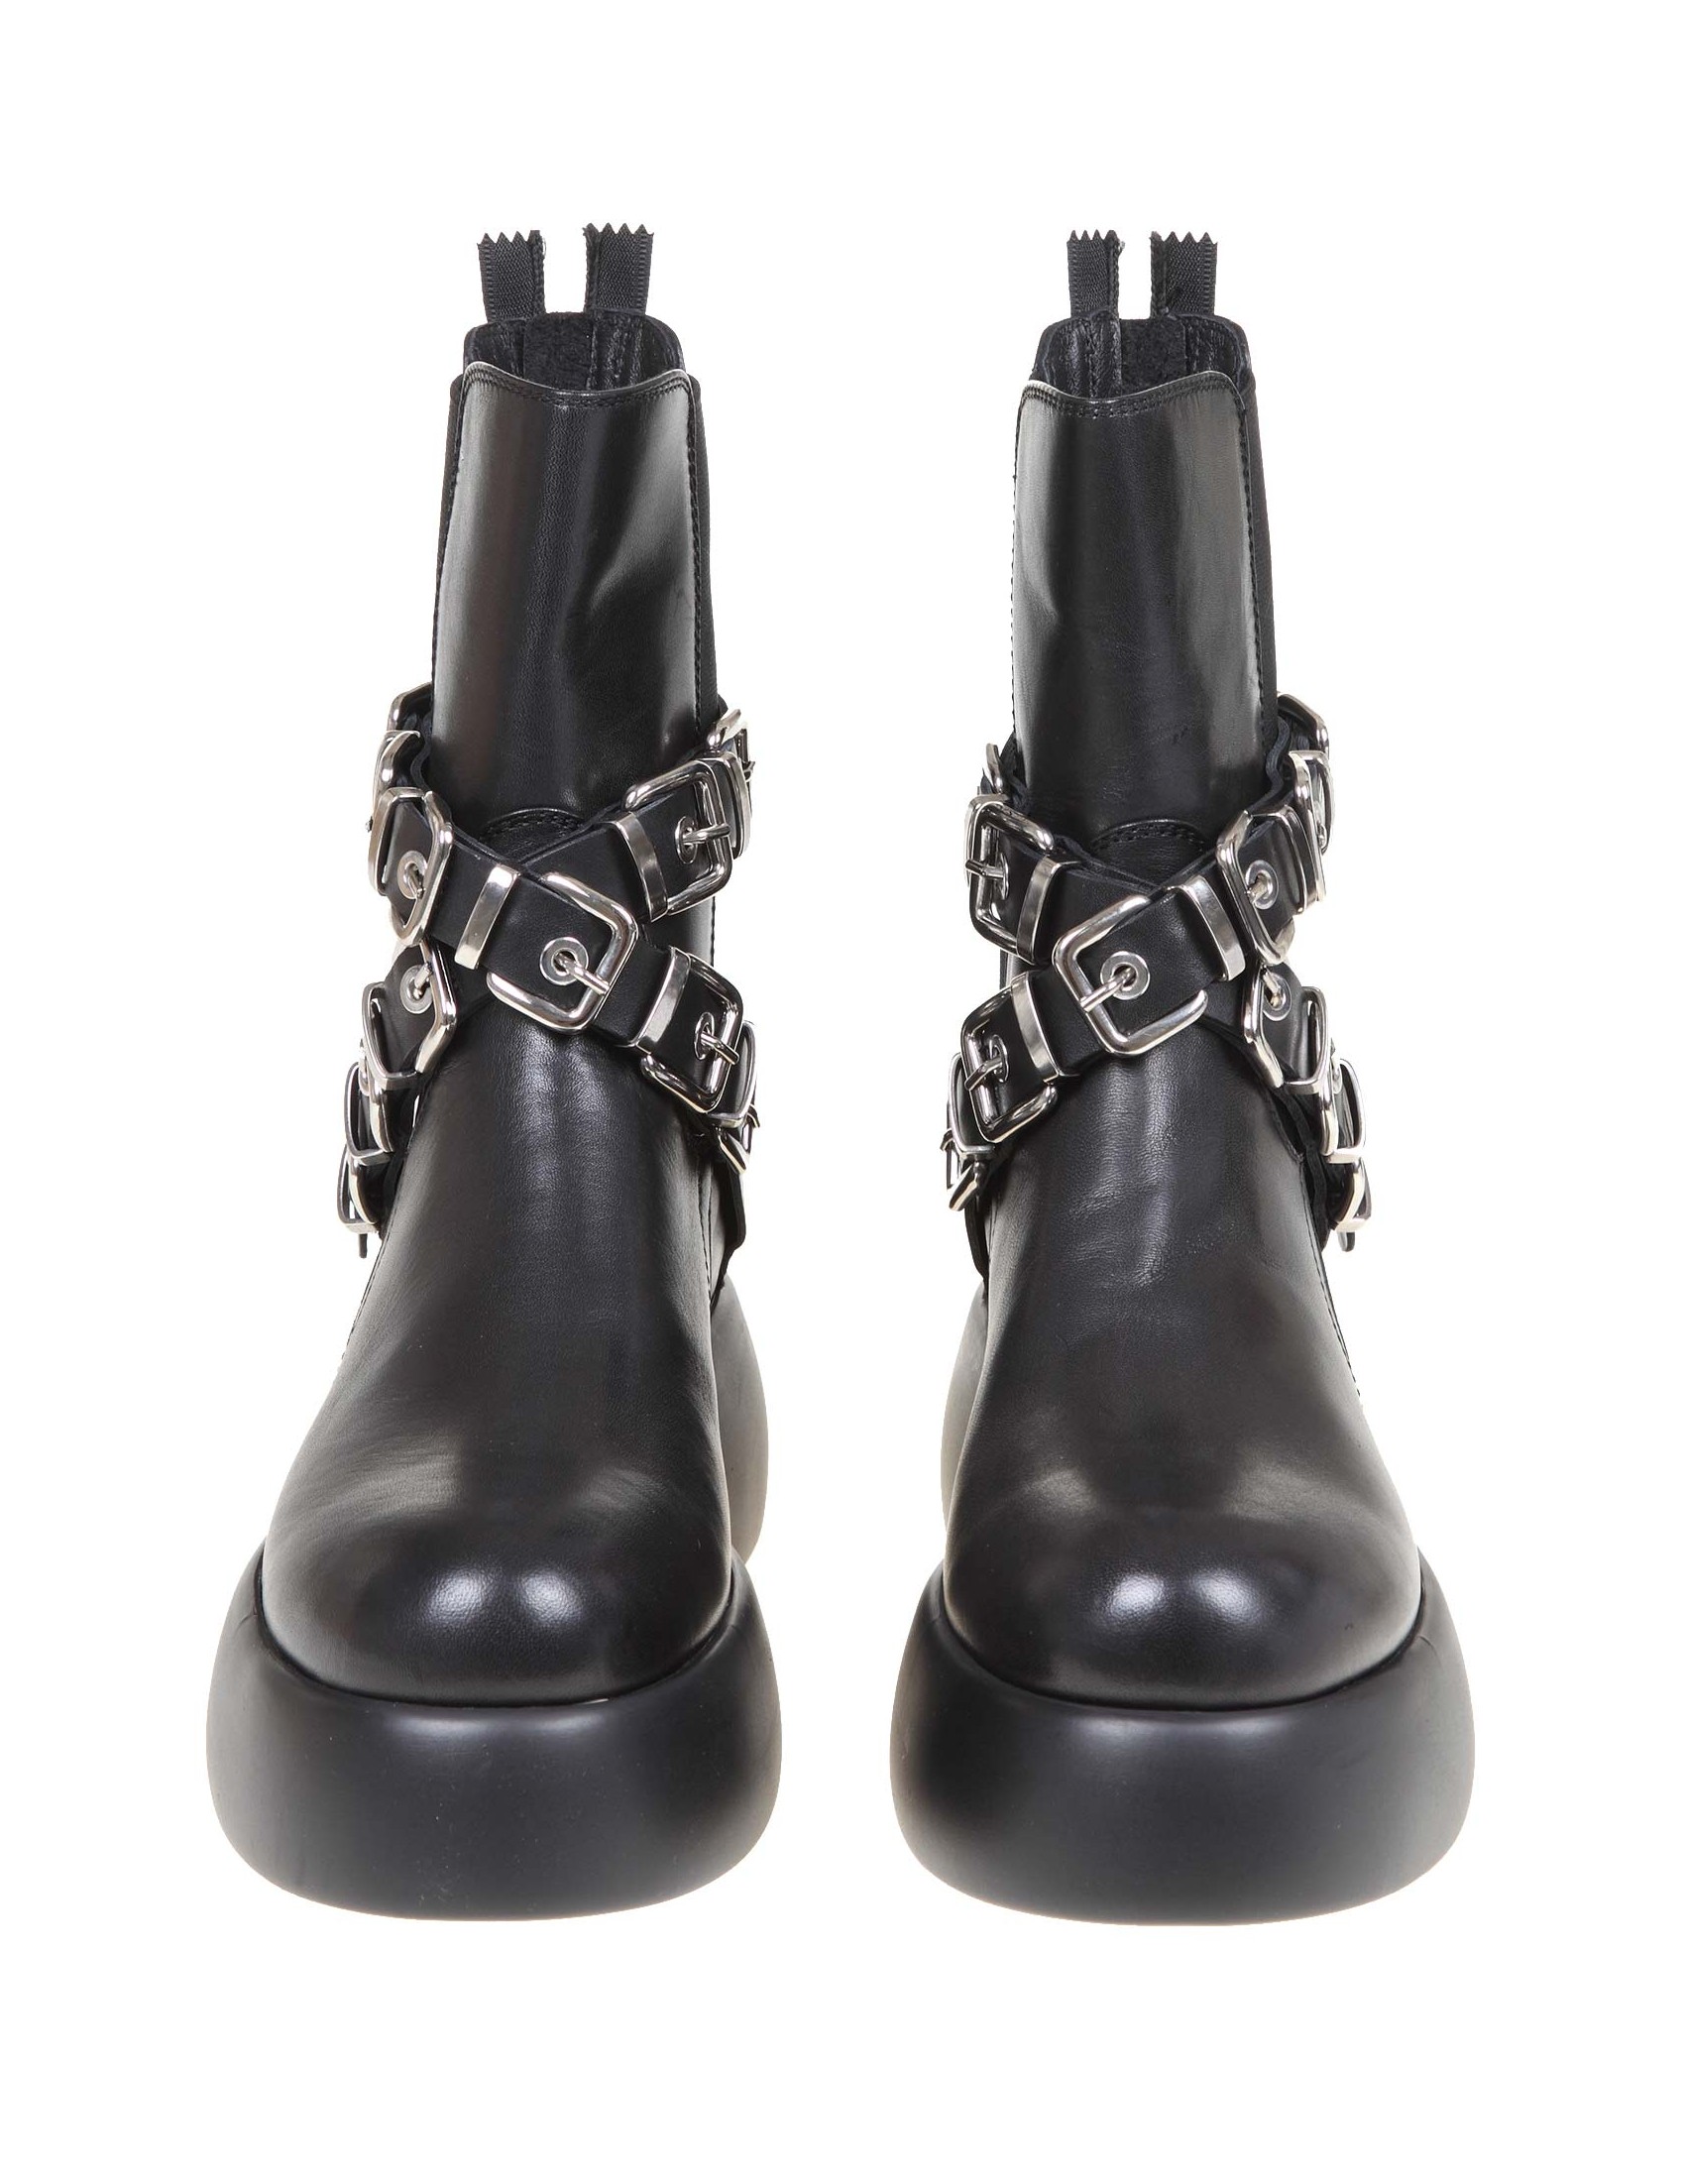 AGL NANCY BOOTS IN BLACK LEATHER